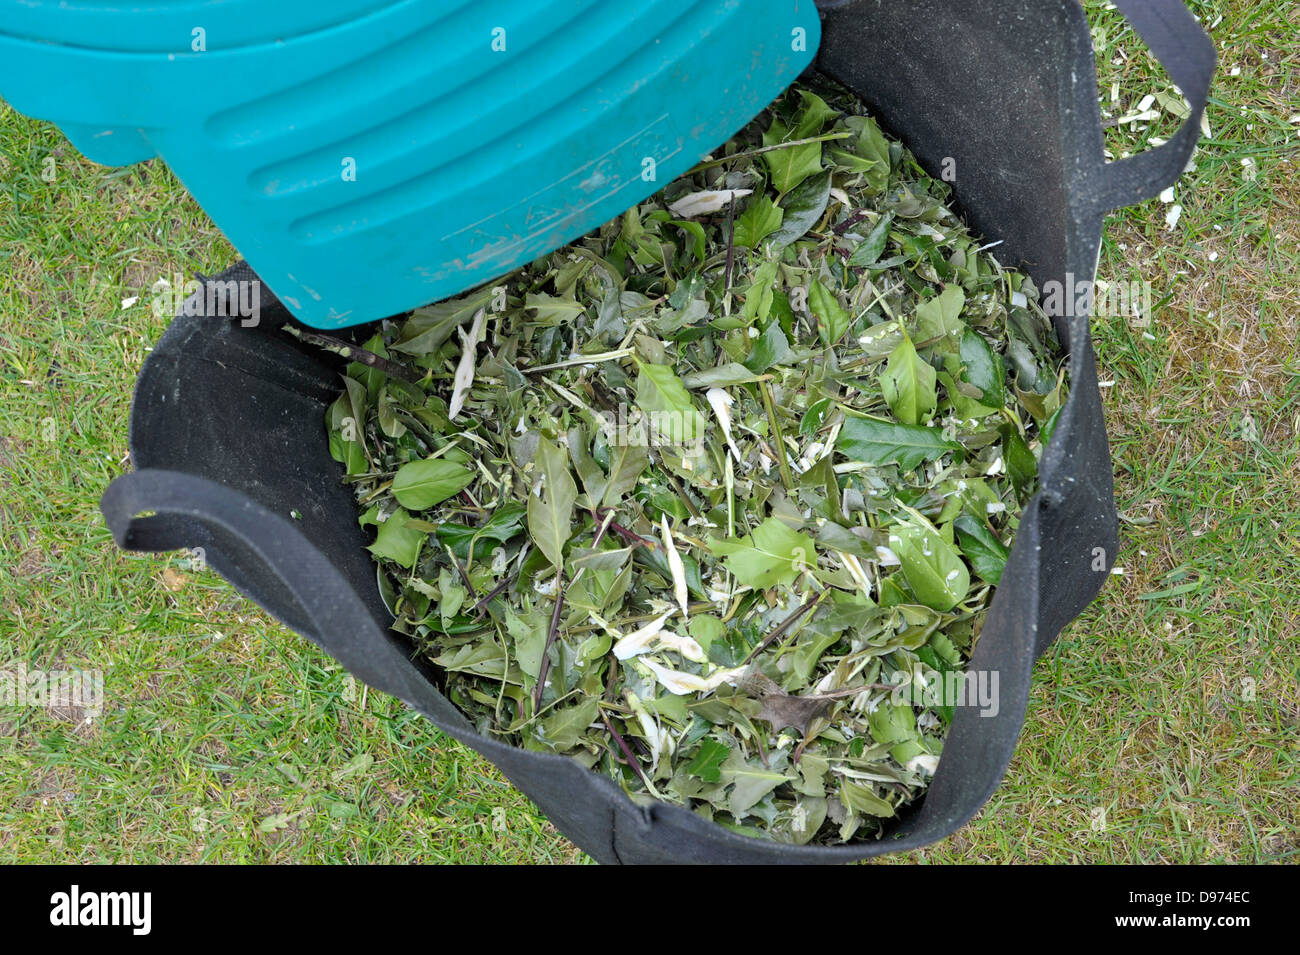 Shredded shrub cuttings in a sack ready for the compost heap or mulching. Stock Photo